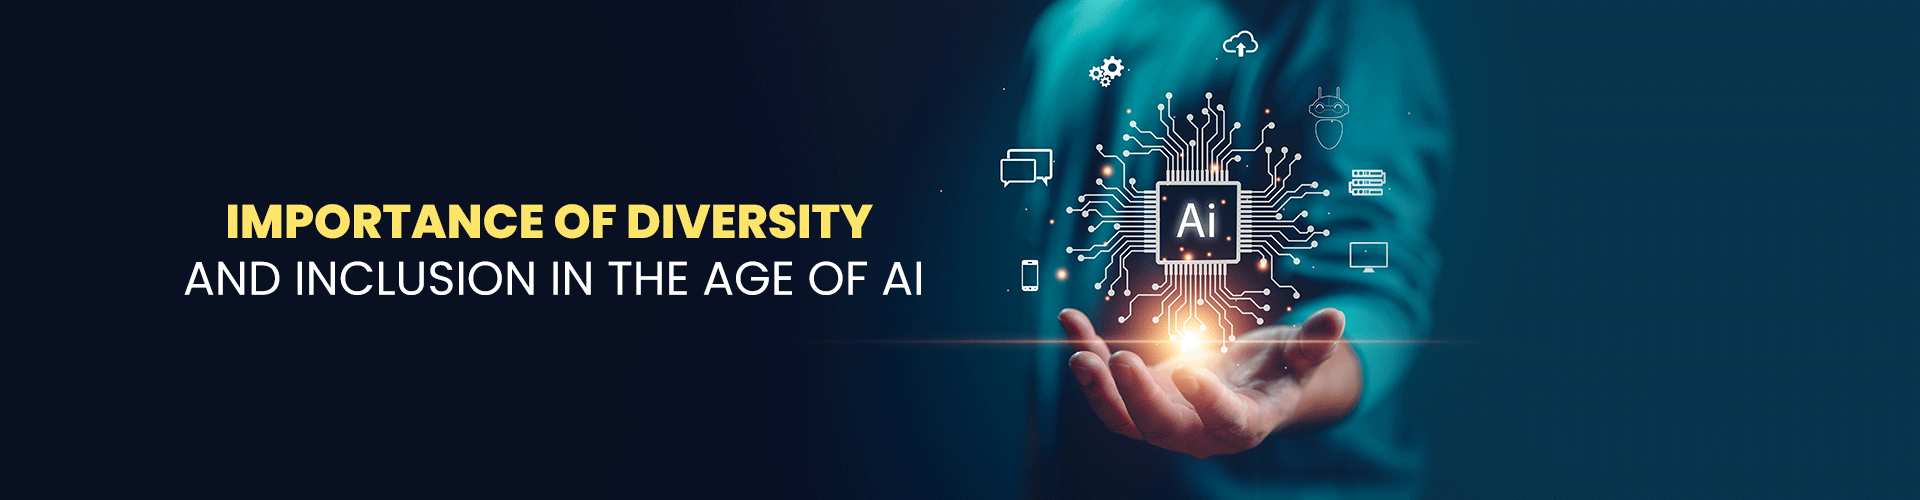 Importance of diversity and inclusion in the age of AI